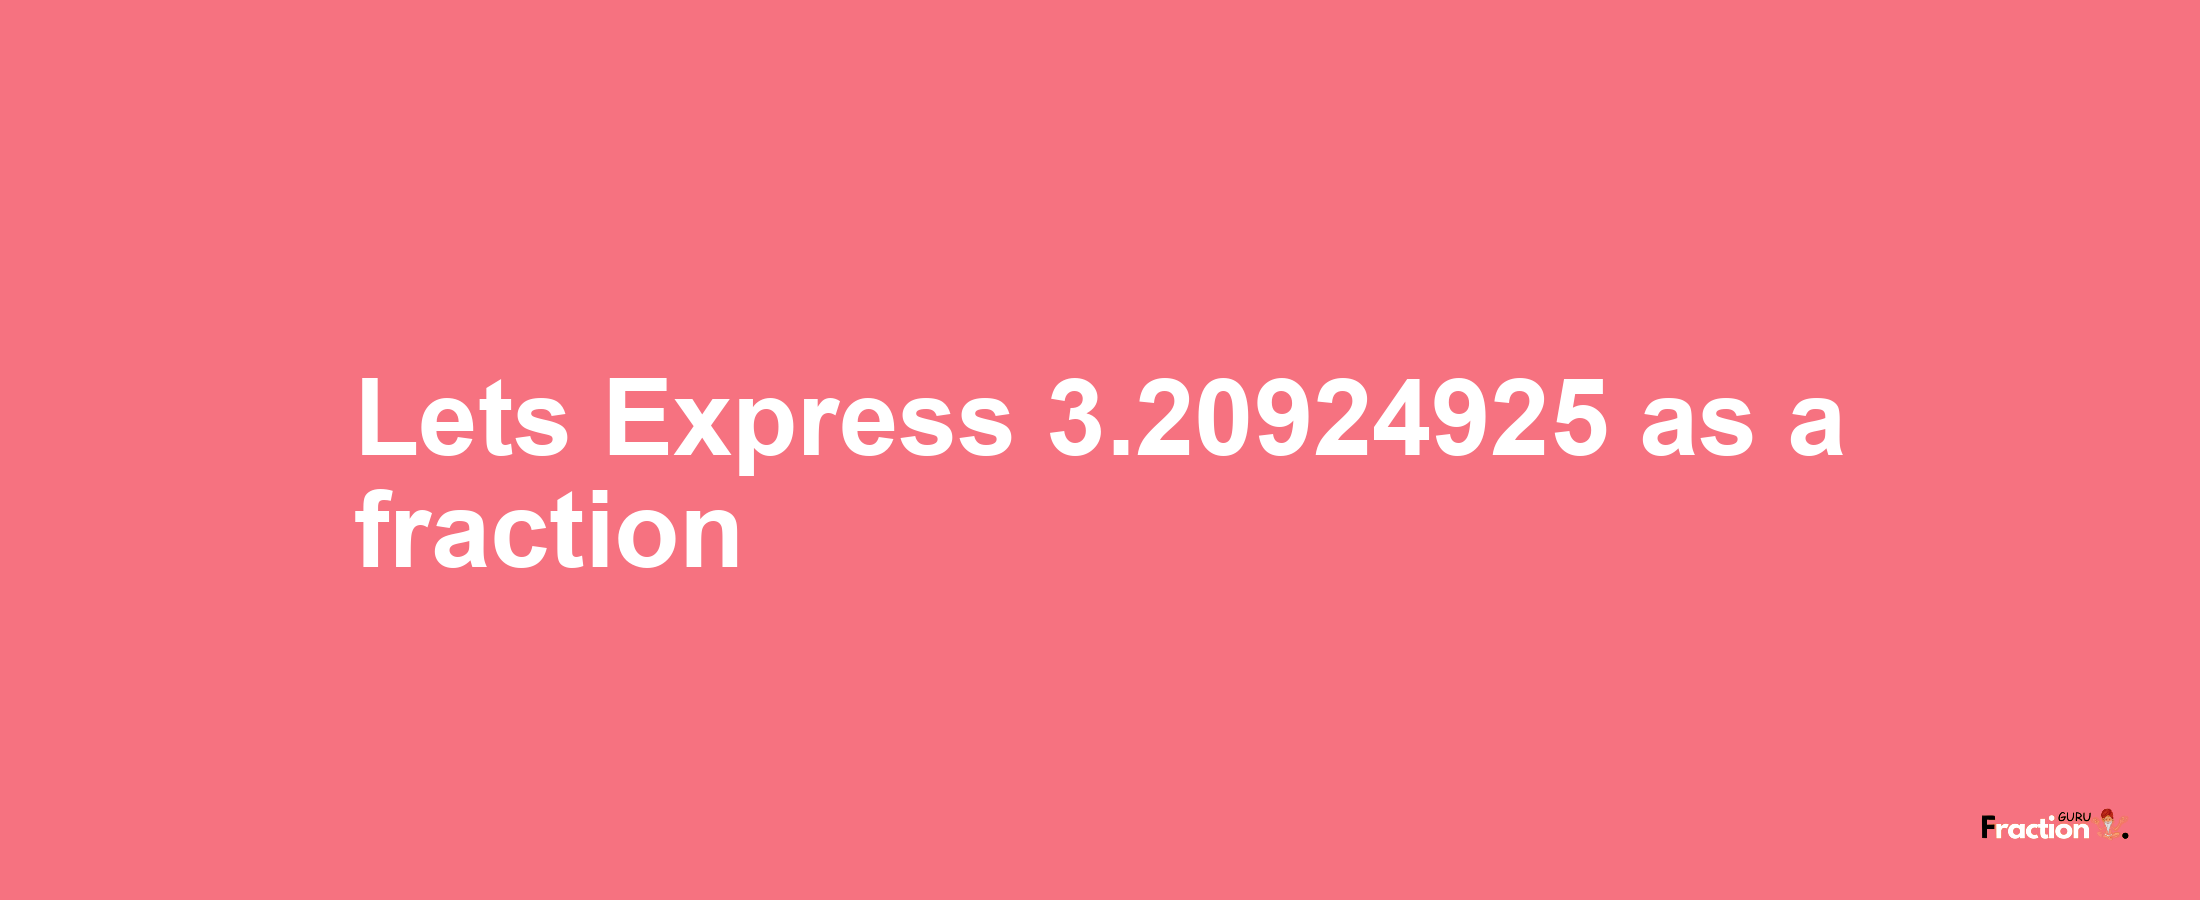 Lets Express 3.20924925 as afraction